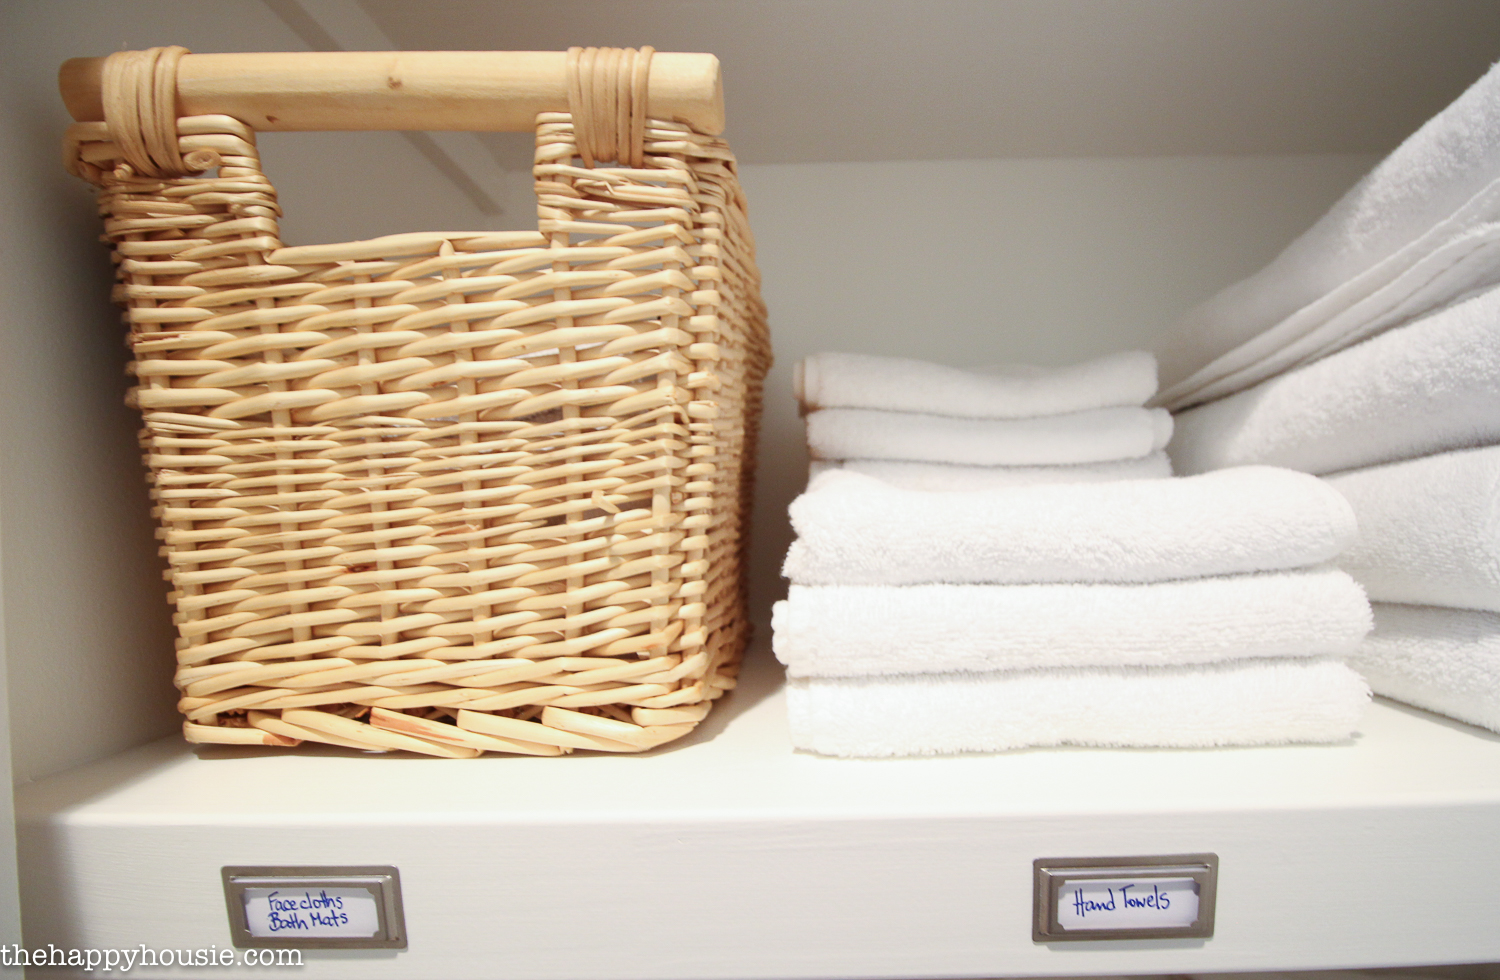 A wicker basket on the shelf and hand towels beside it.